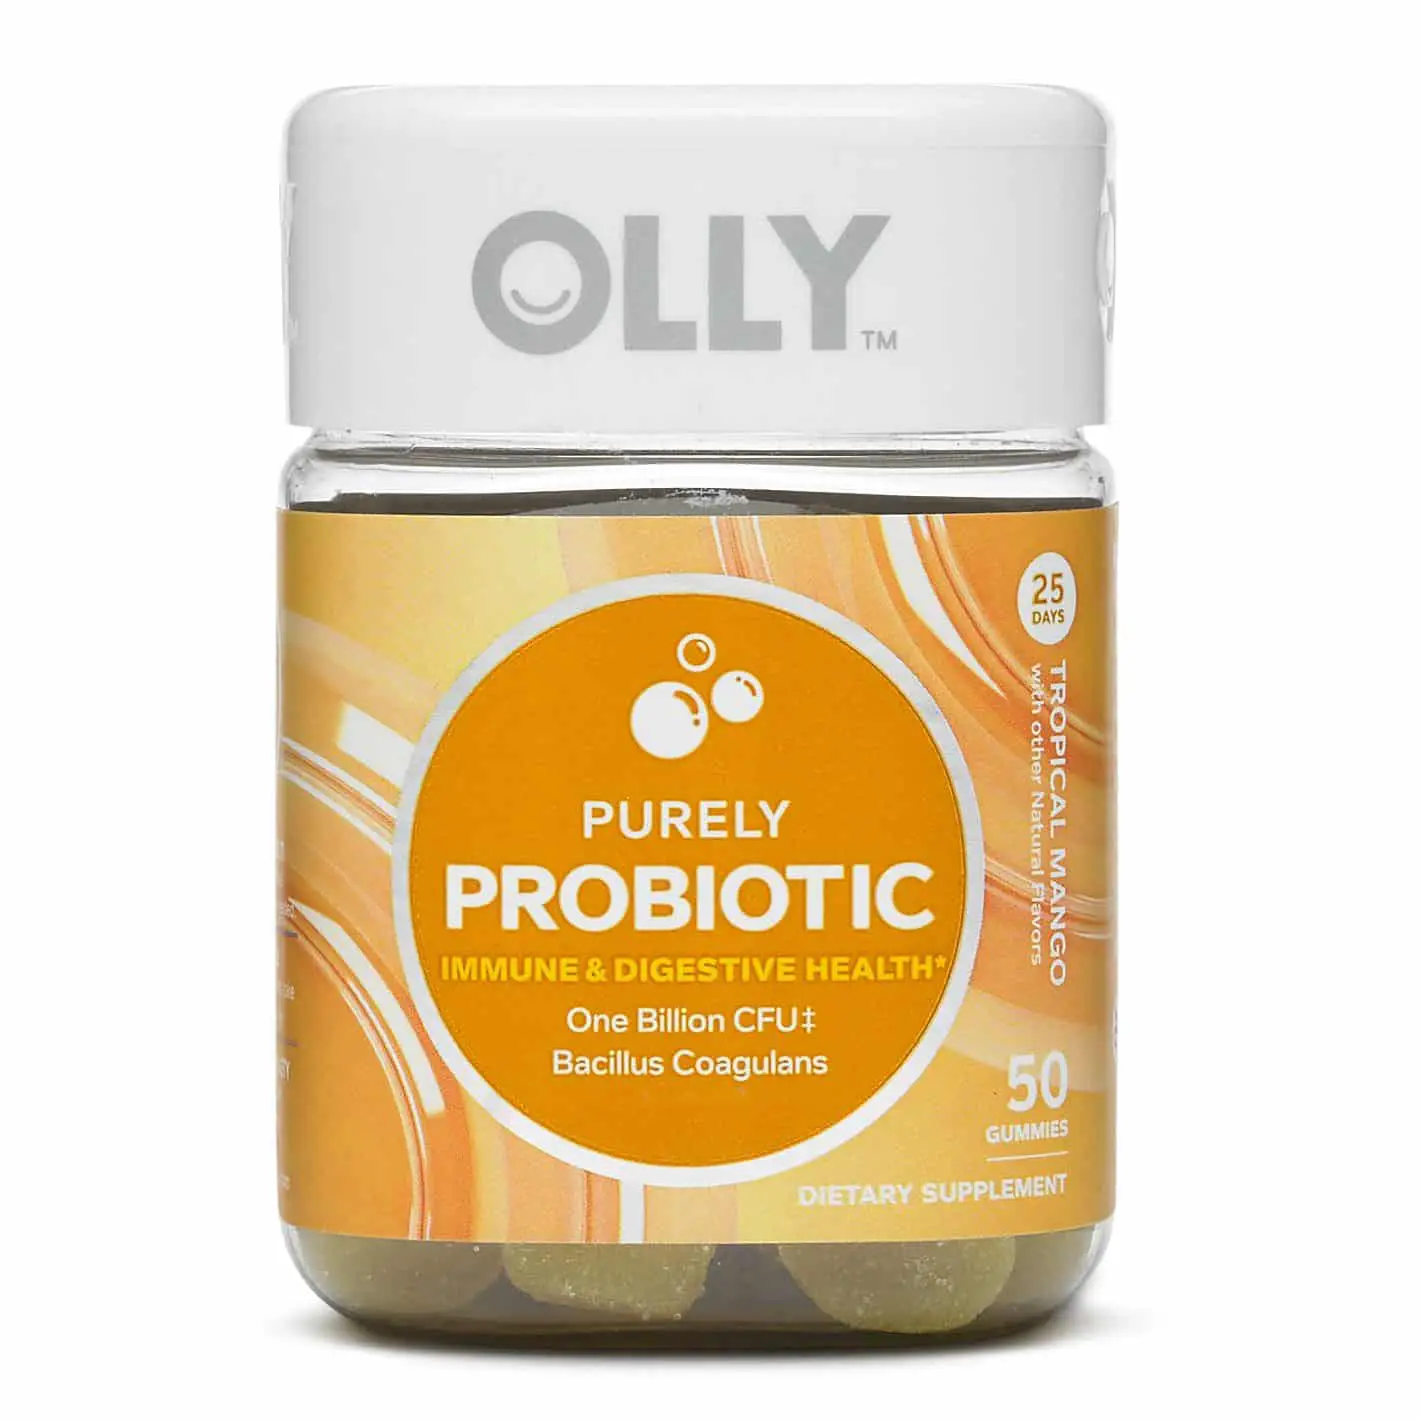 The Best Probiotic Supplements for Digestive Health and Immune System